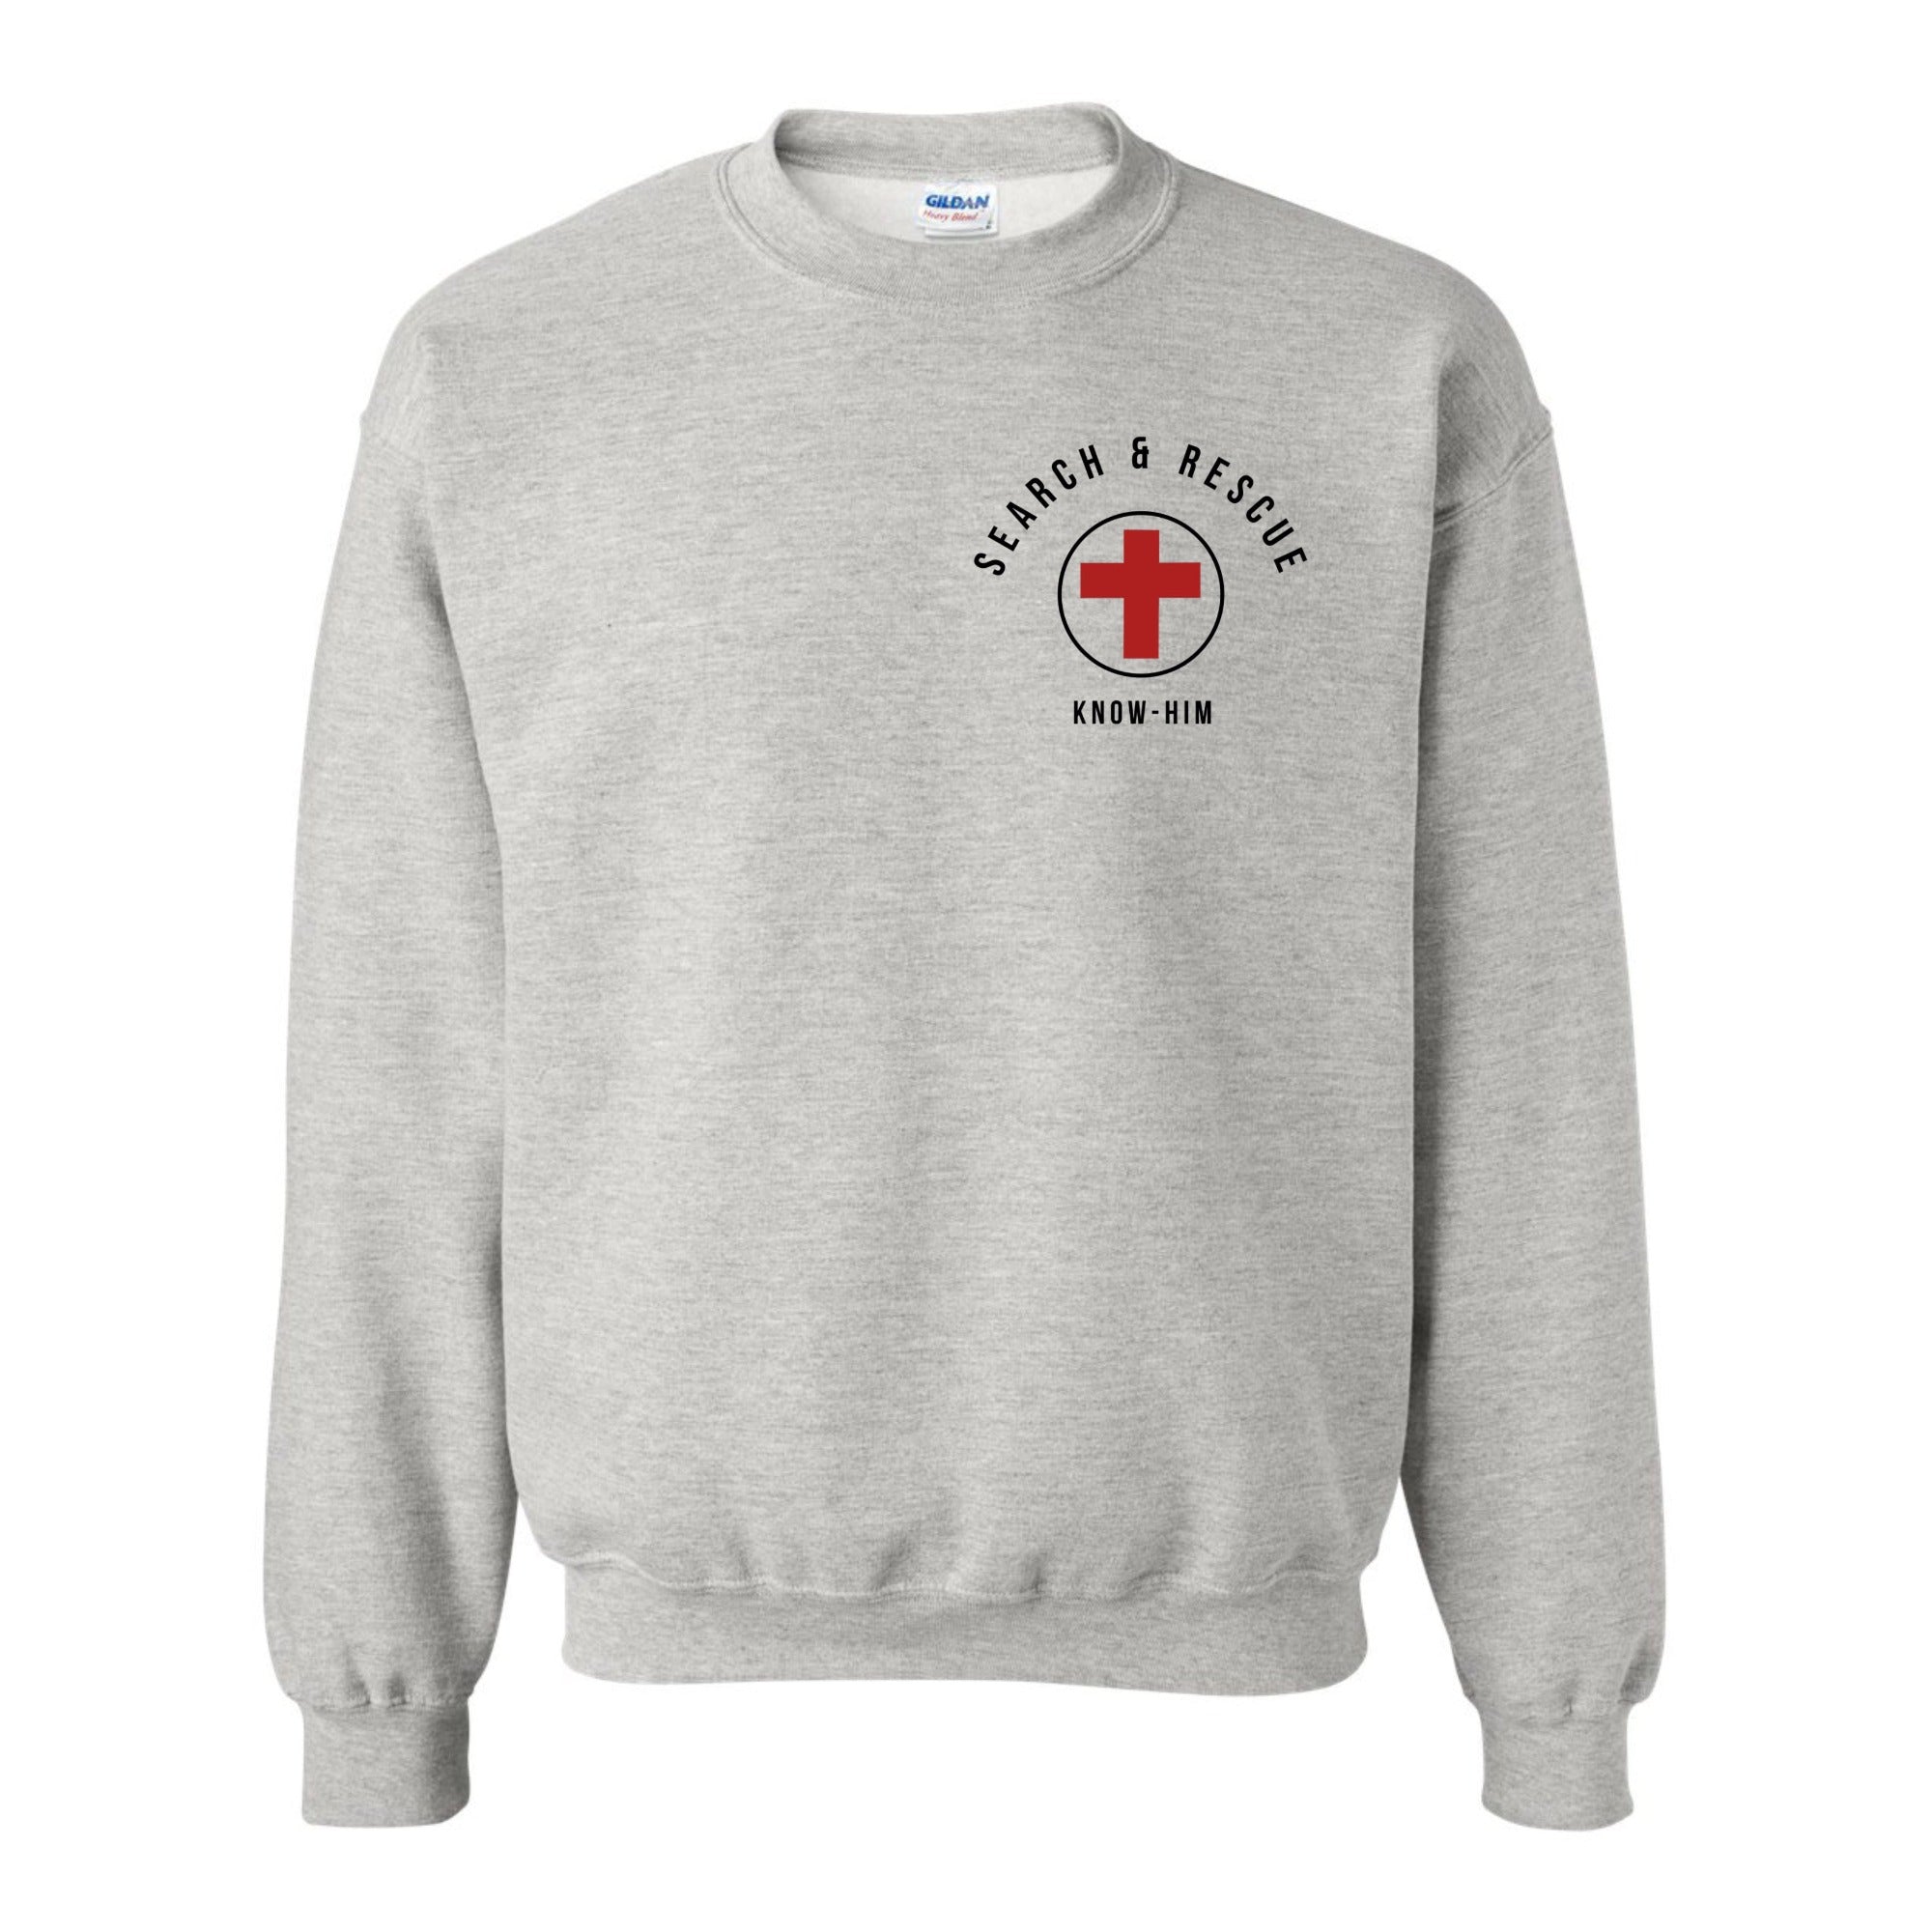 Search and Rescue (Sports Grey) - Crewneck